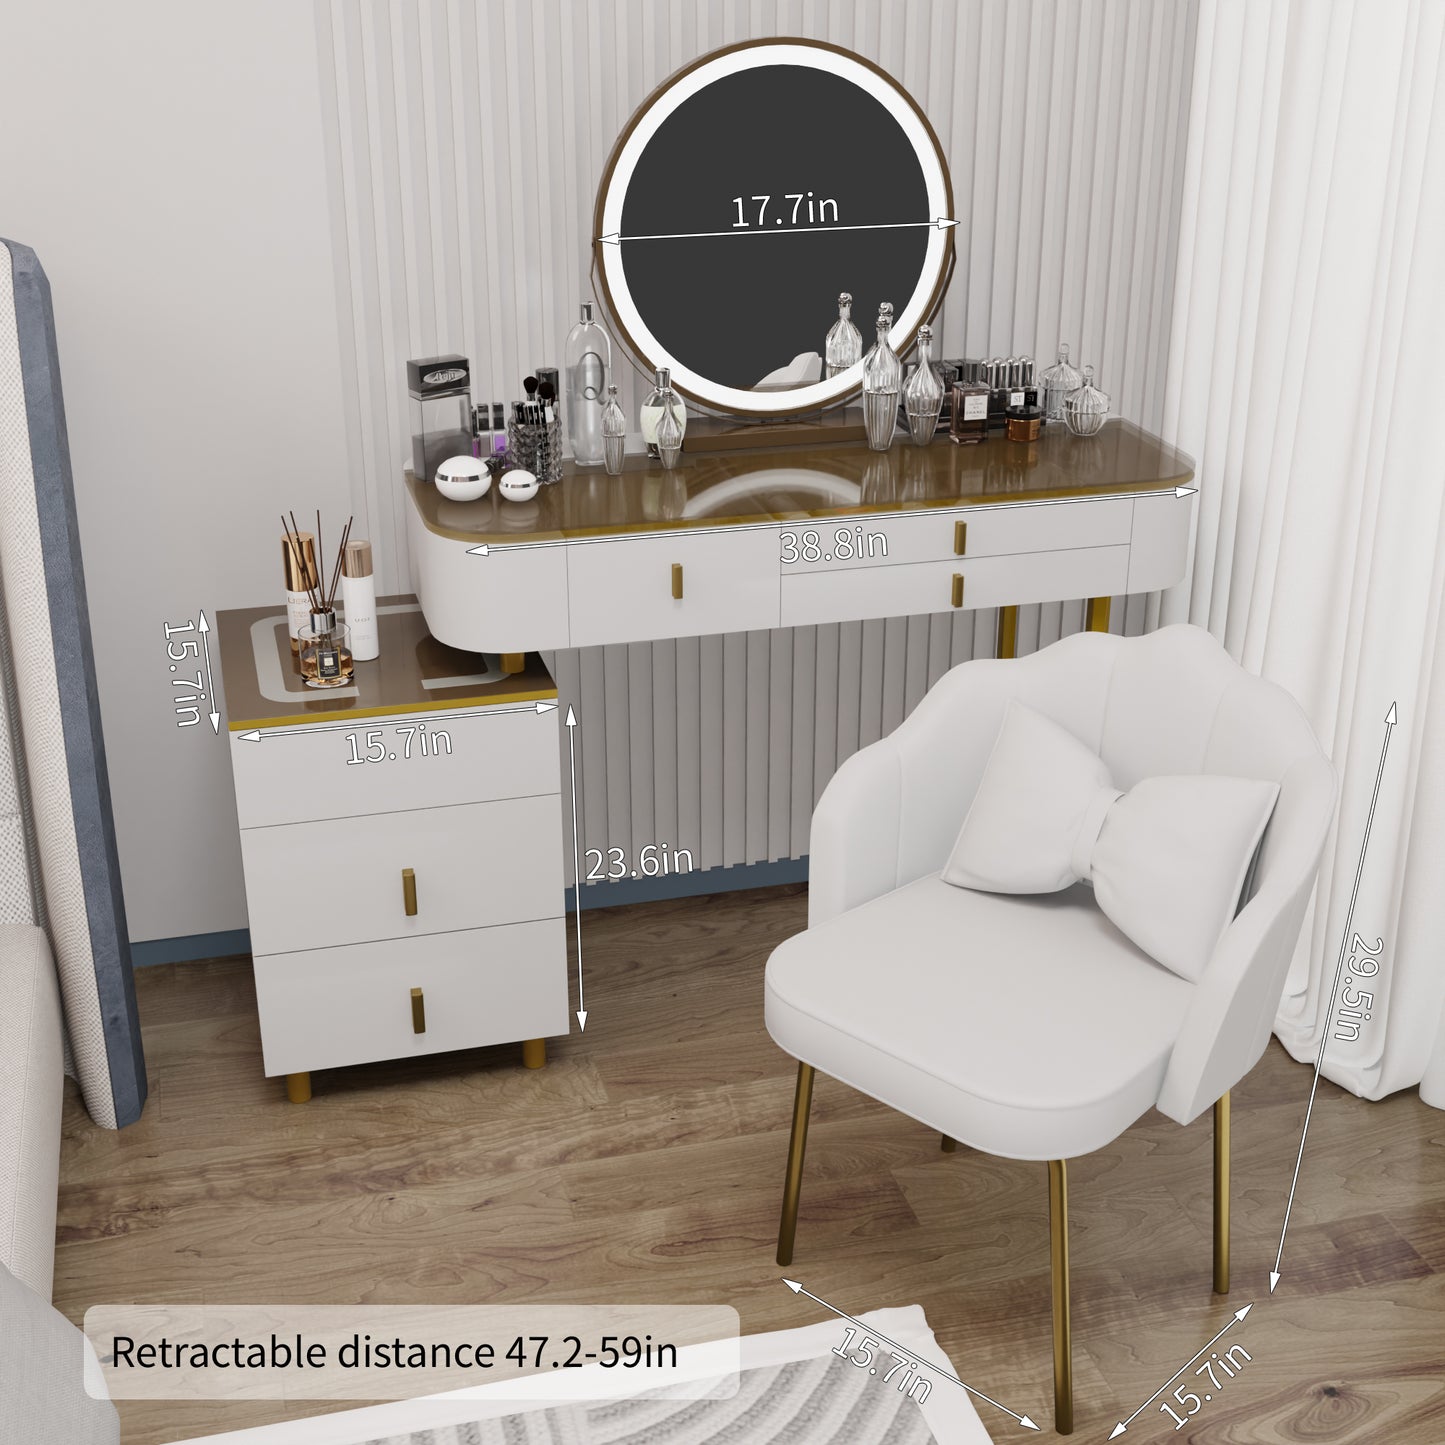 Vanity Table with Mirror,Transparent Desktop Design,Modern Vanity Set with Movable Cabinet,Large Capacity Drawers and Petal Chair for Bedroom